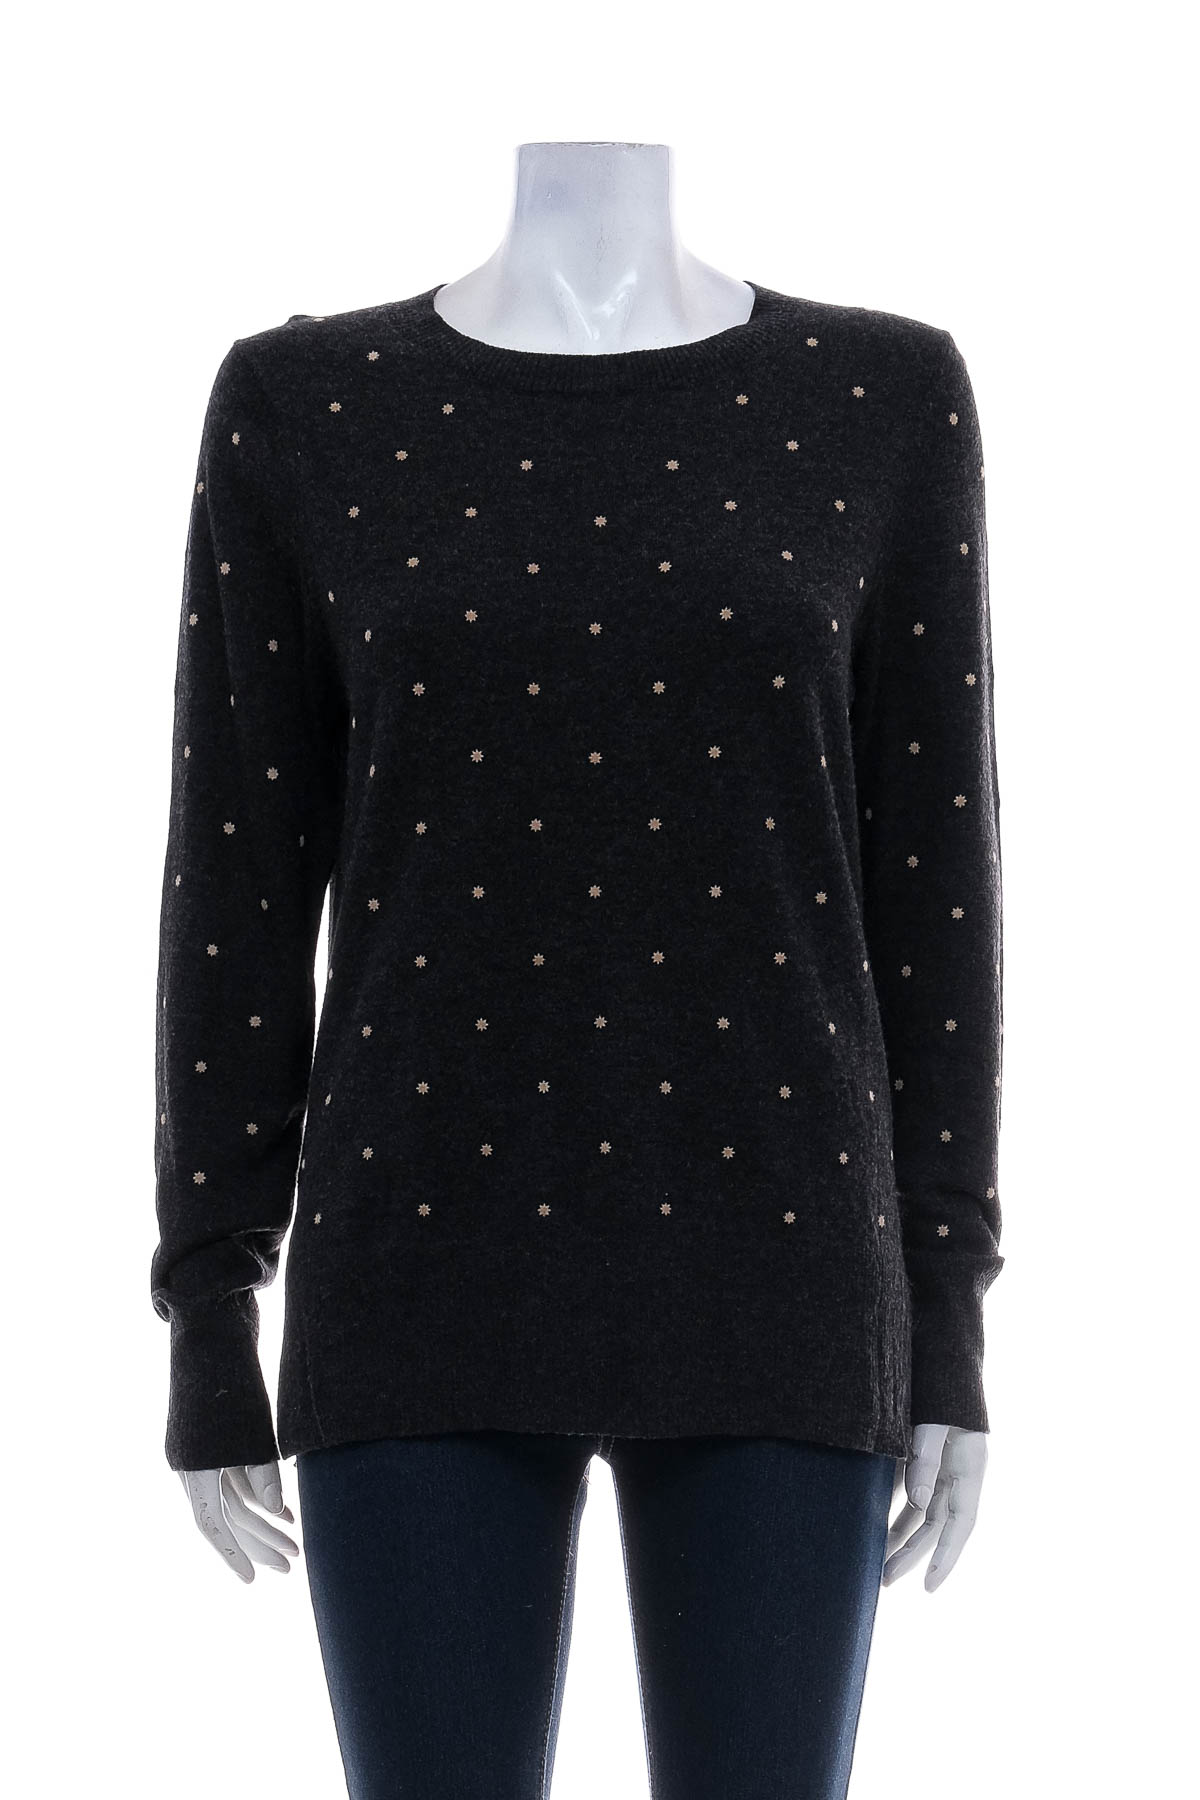 Women's sweater - COUNTRY ROAD - 0